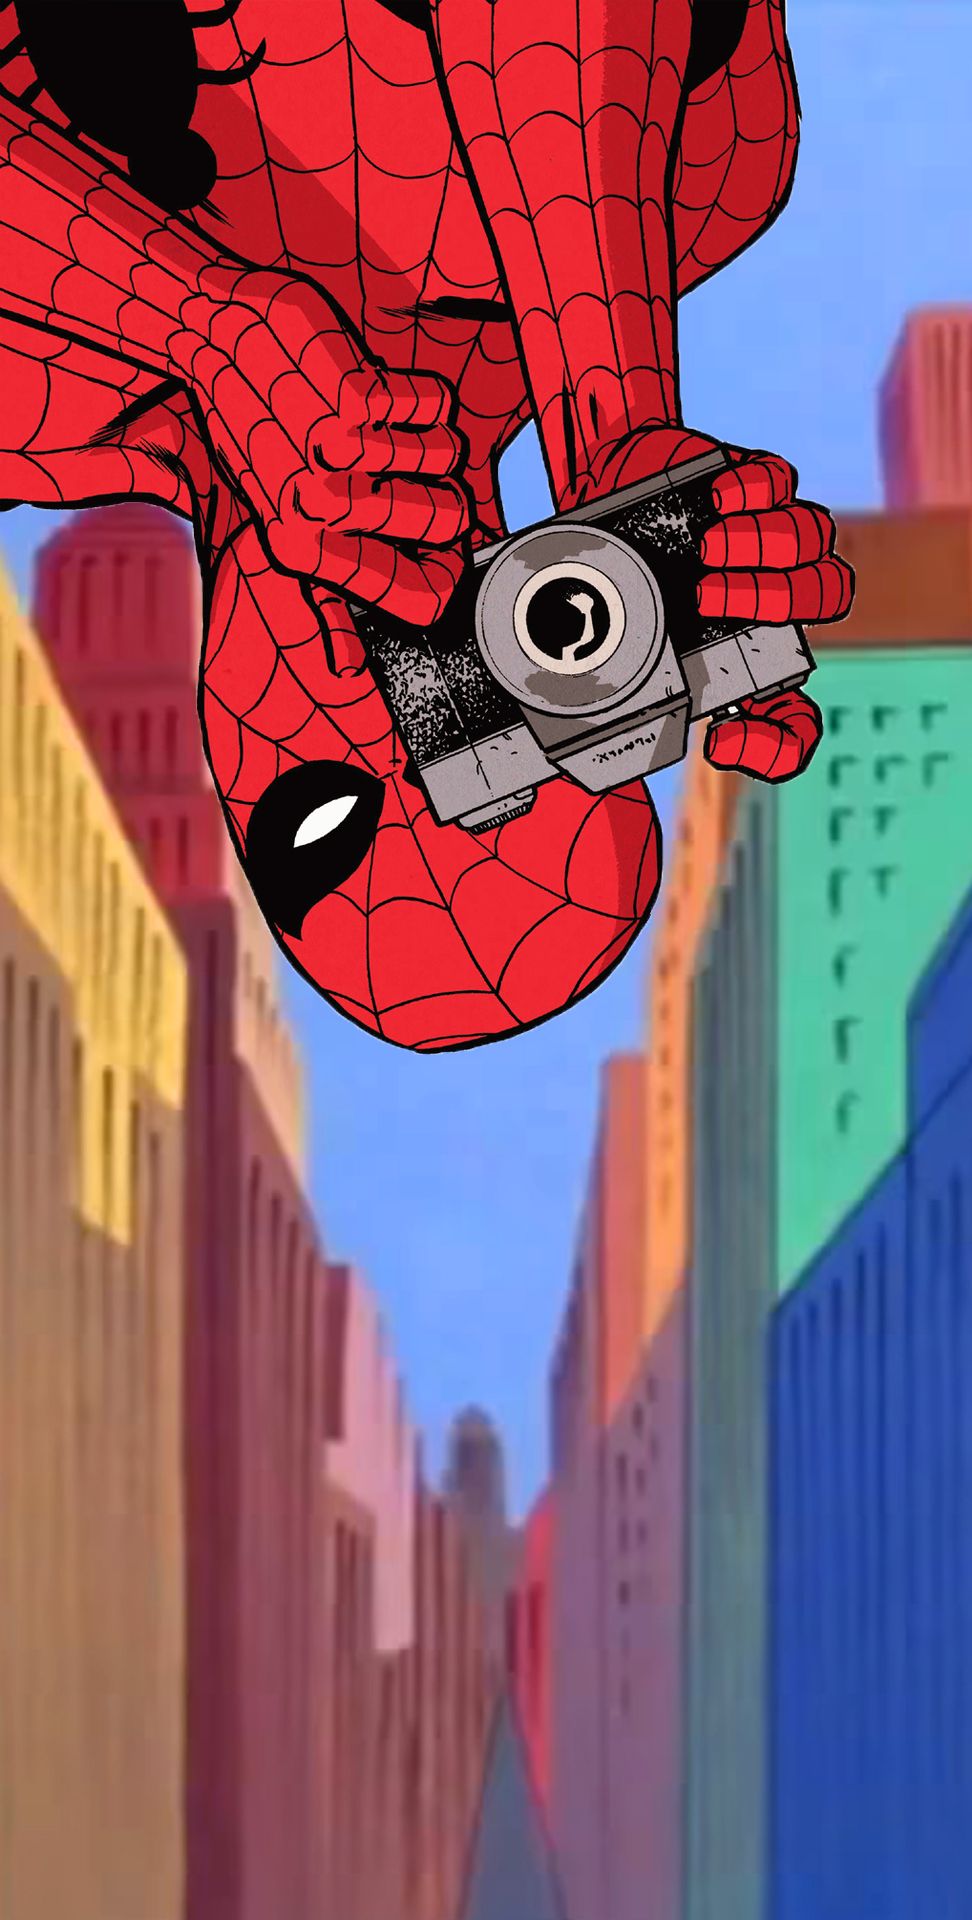 Spider-Man (1967) Wallpapers